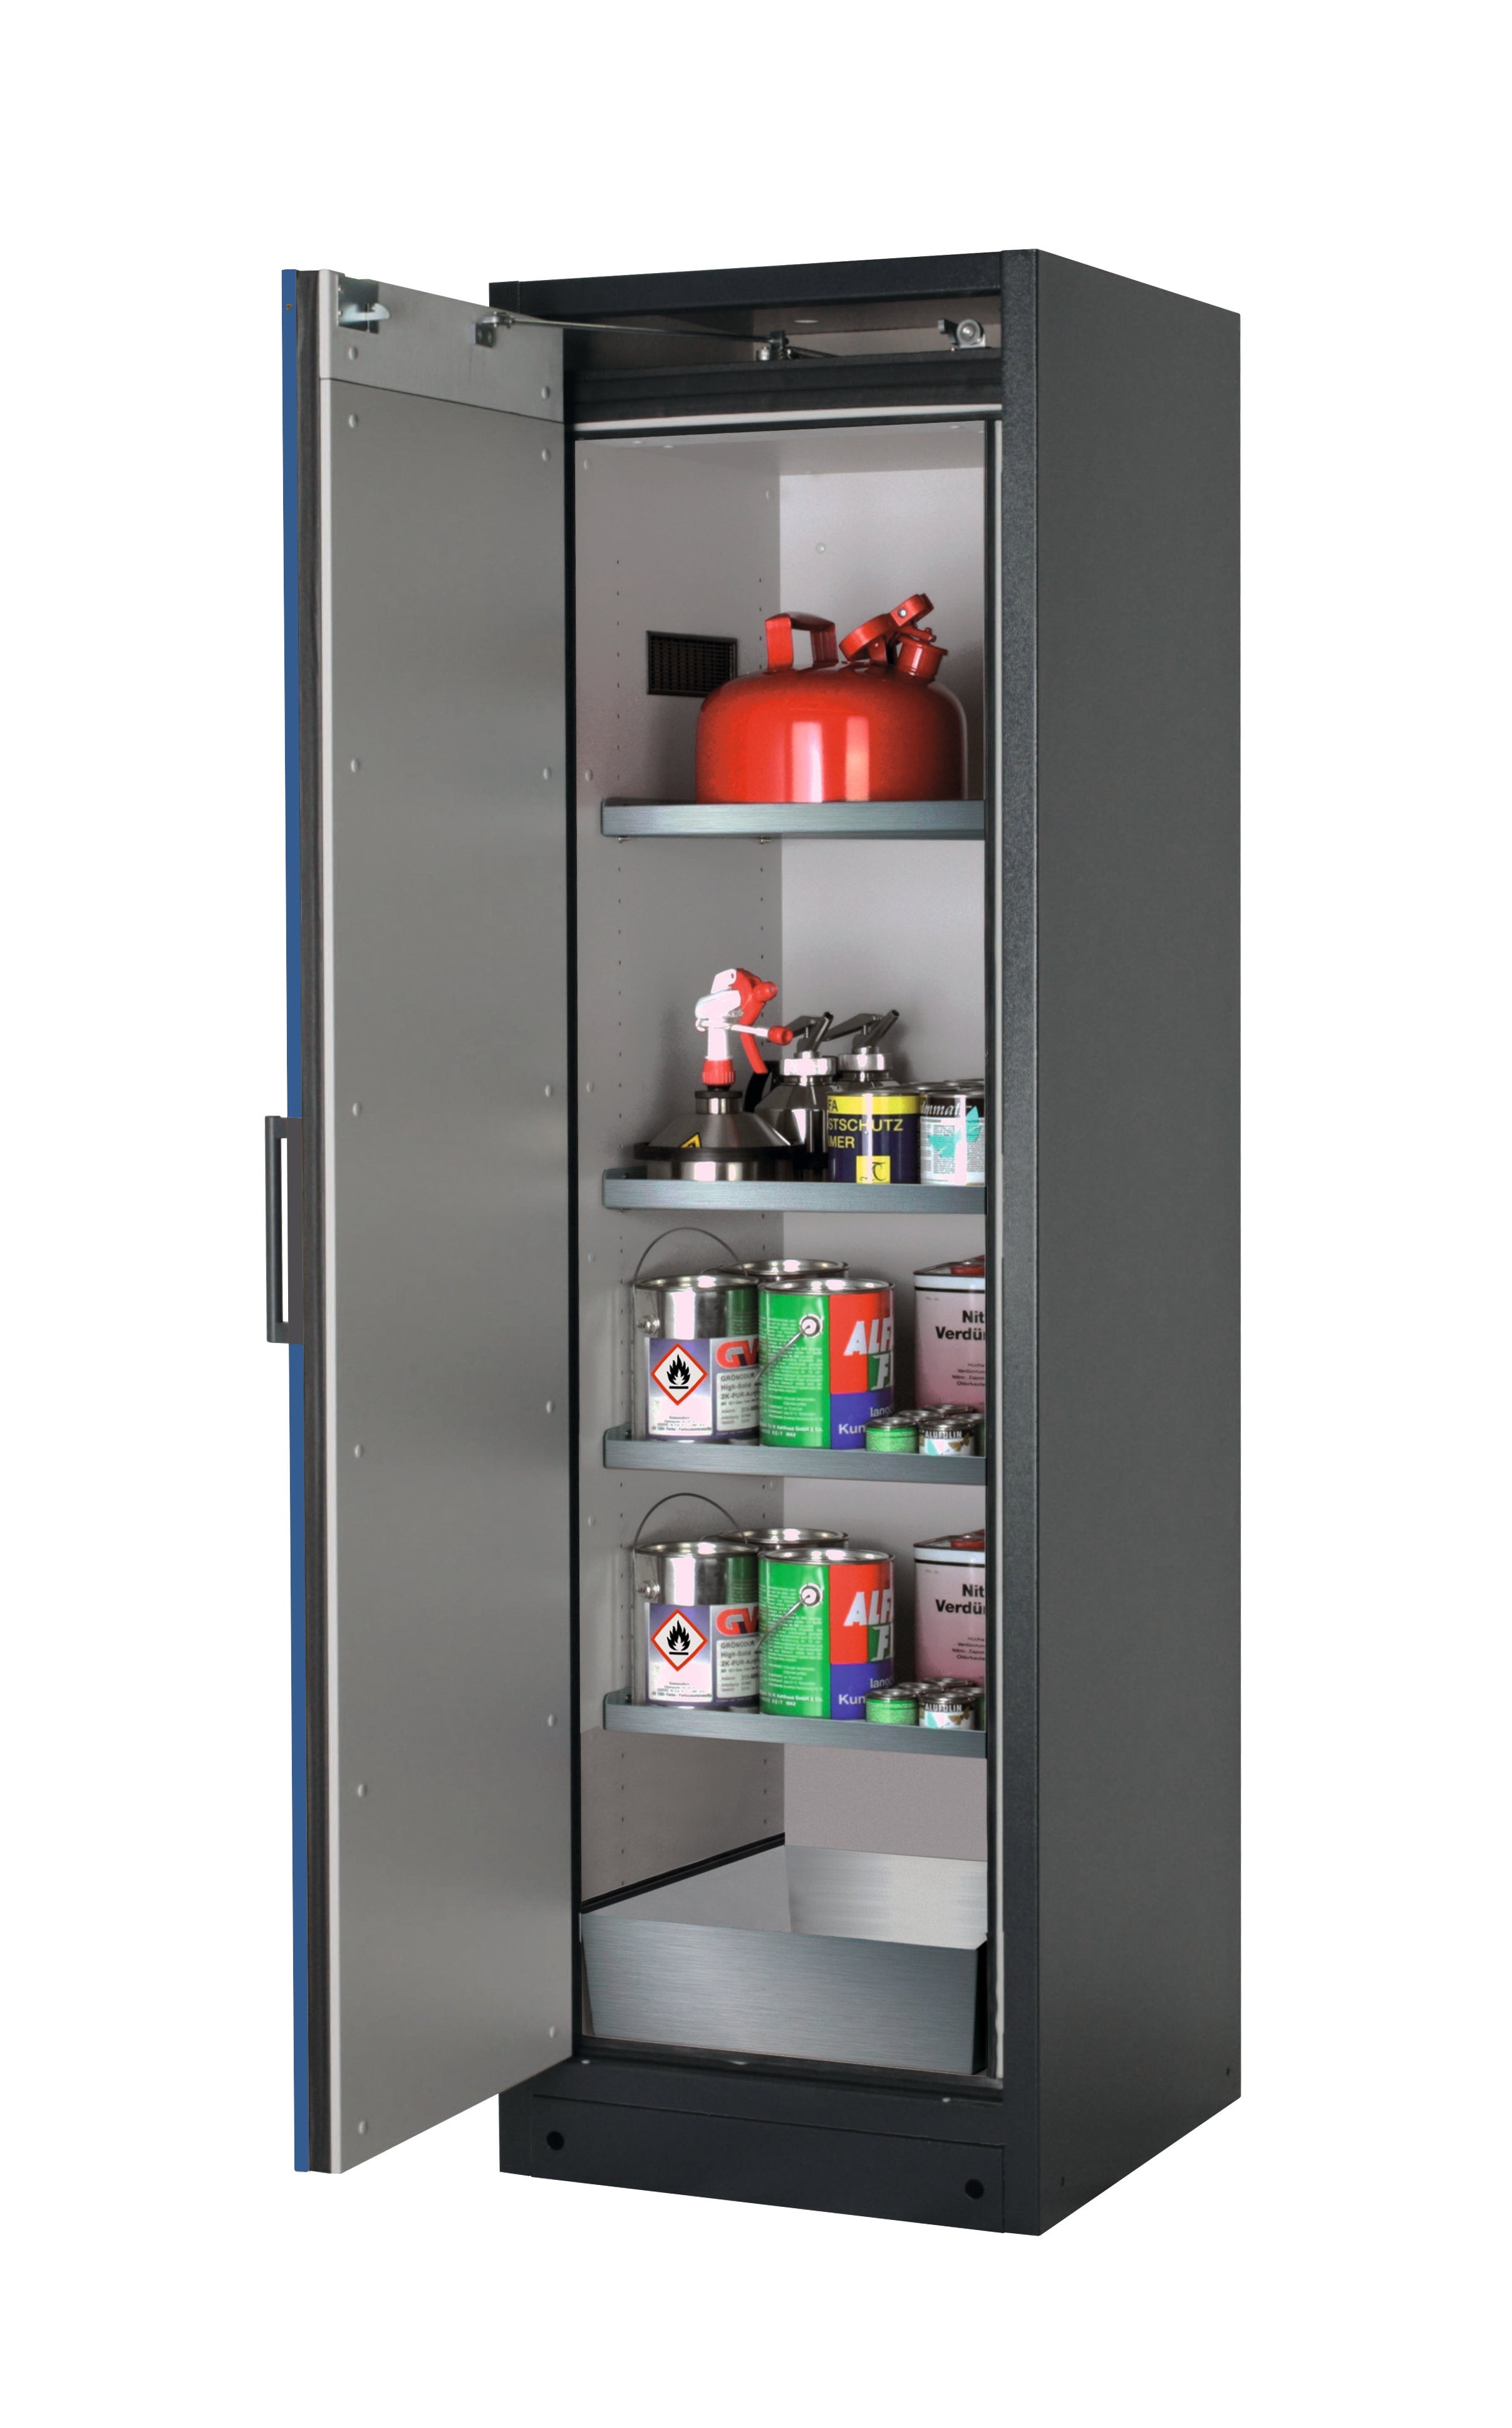 Type 90 safety storage cabinet Q-CLASSIC-90 model Q90.195.060 in gentian blue RAL 5010 with 4x shelf standard (stainless steel 1.4301),